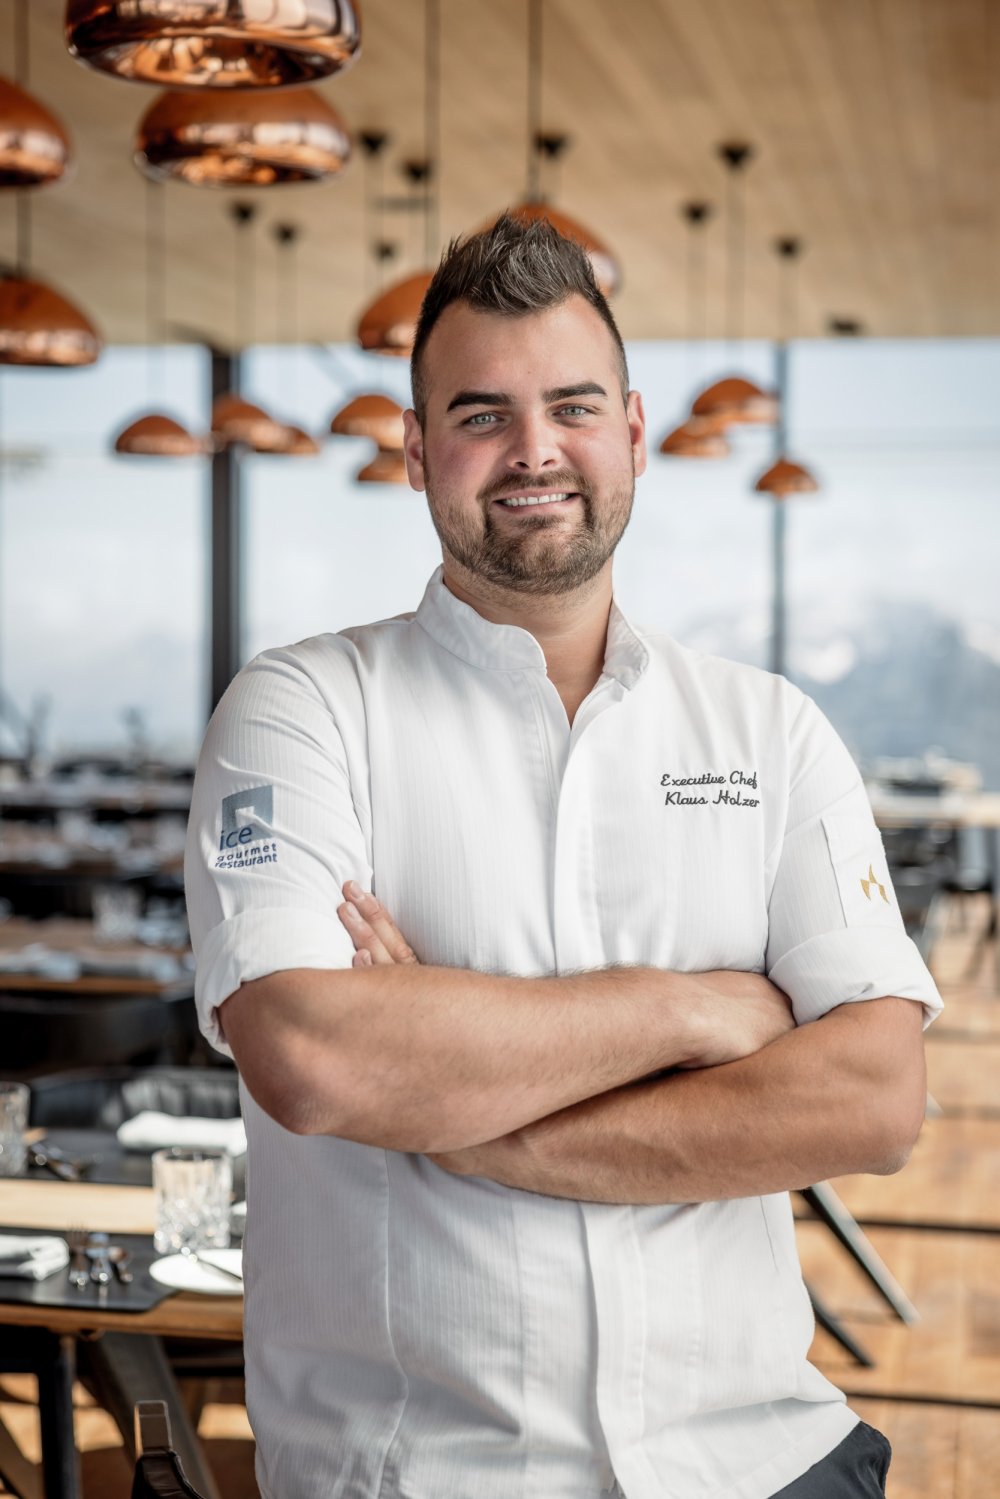 Klaus Holzer - Chef from the ice Q restaurant